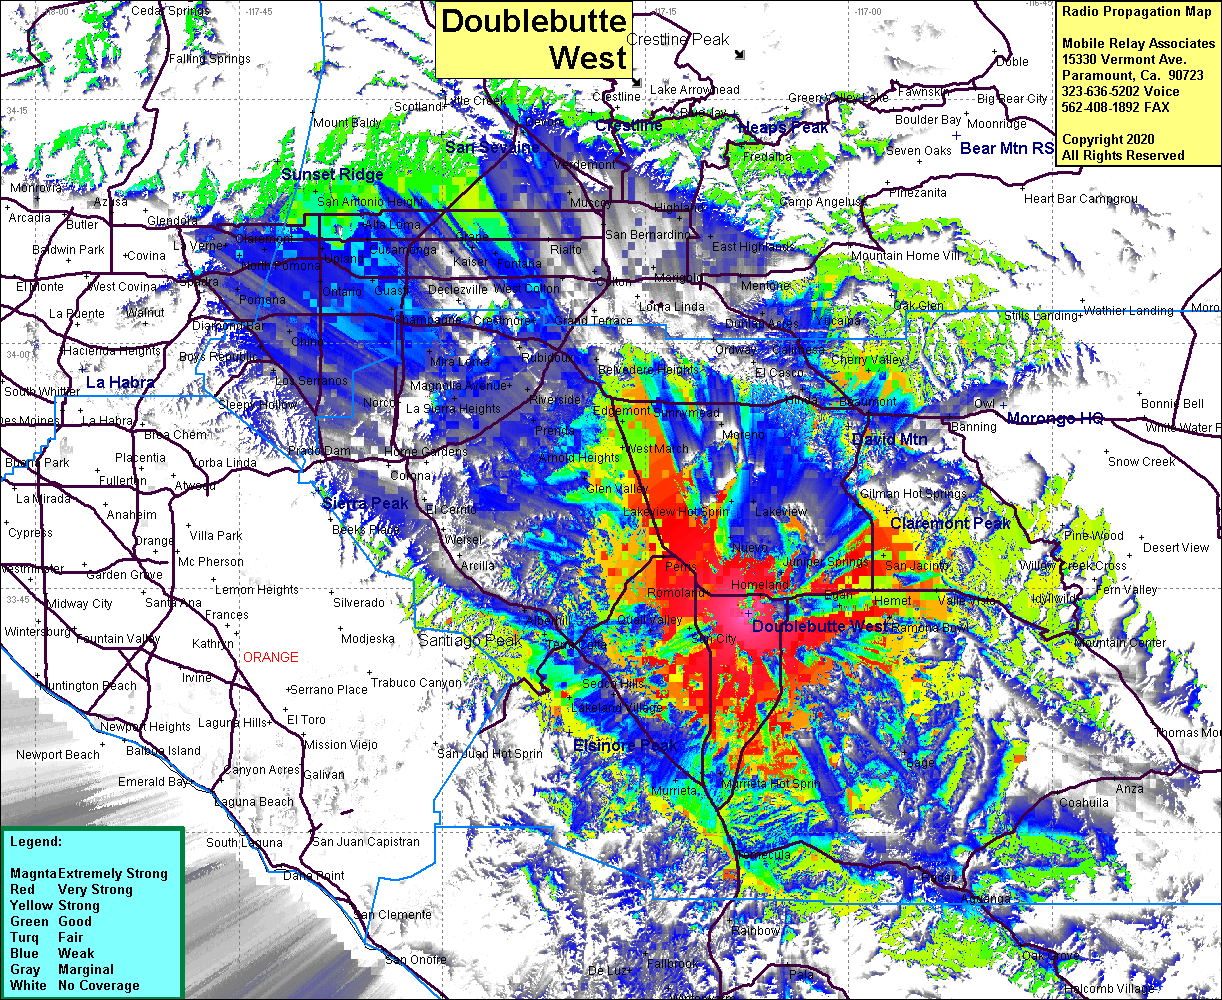 heat map radio coverage Doublebutte West